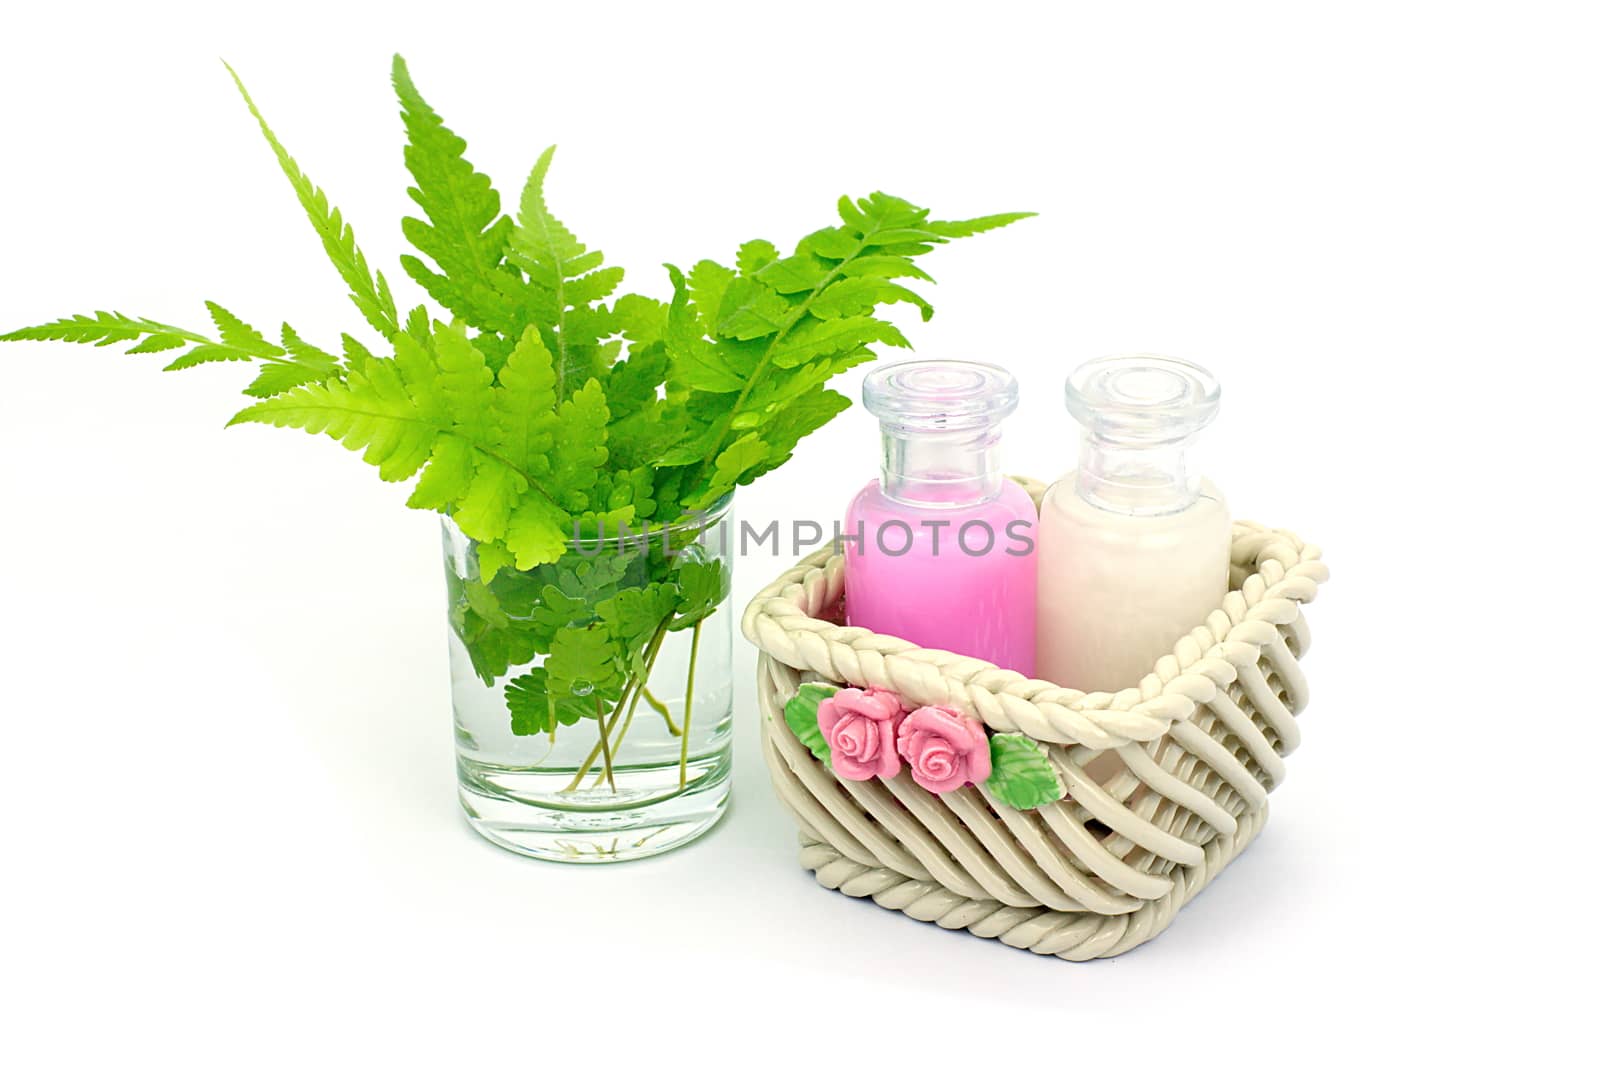 Shampoo and Shower gel put in ceramic basket on white background. Shampoo, Shower gel bottles with green leaves in a glass of water.